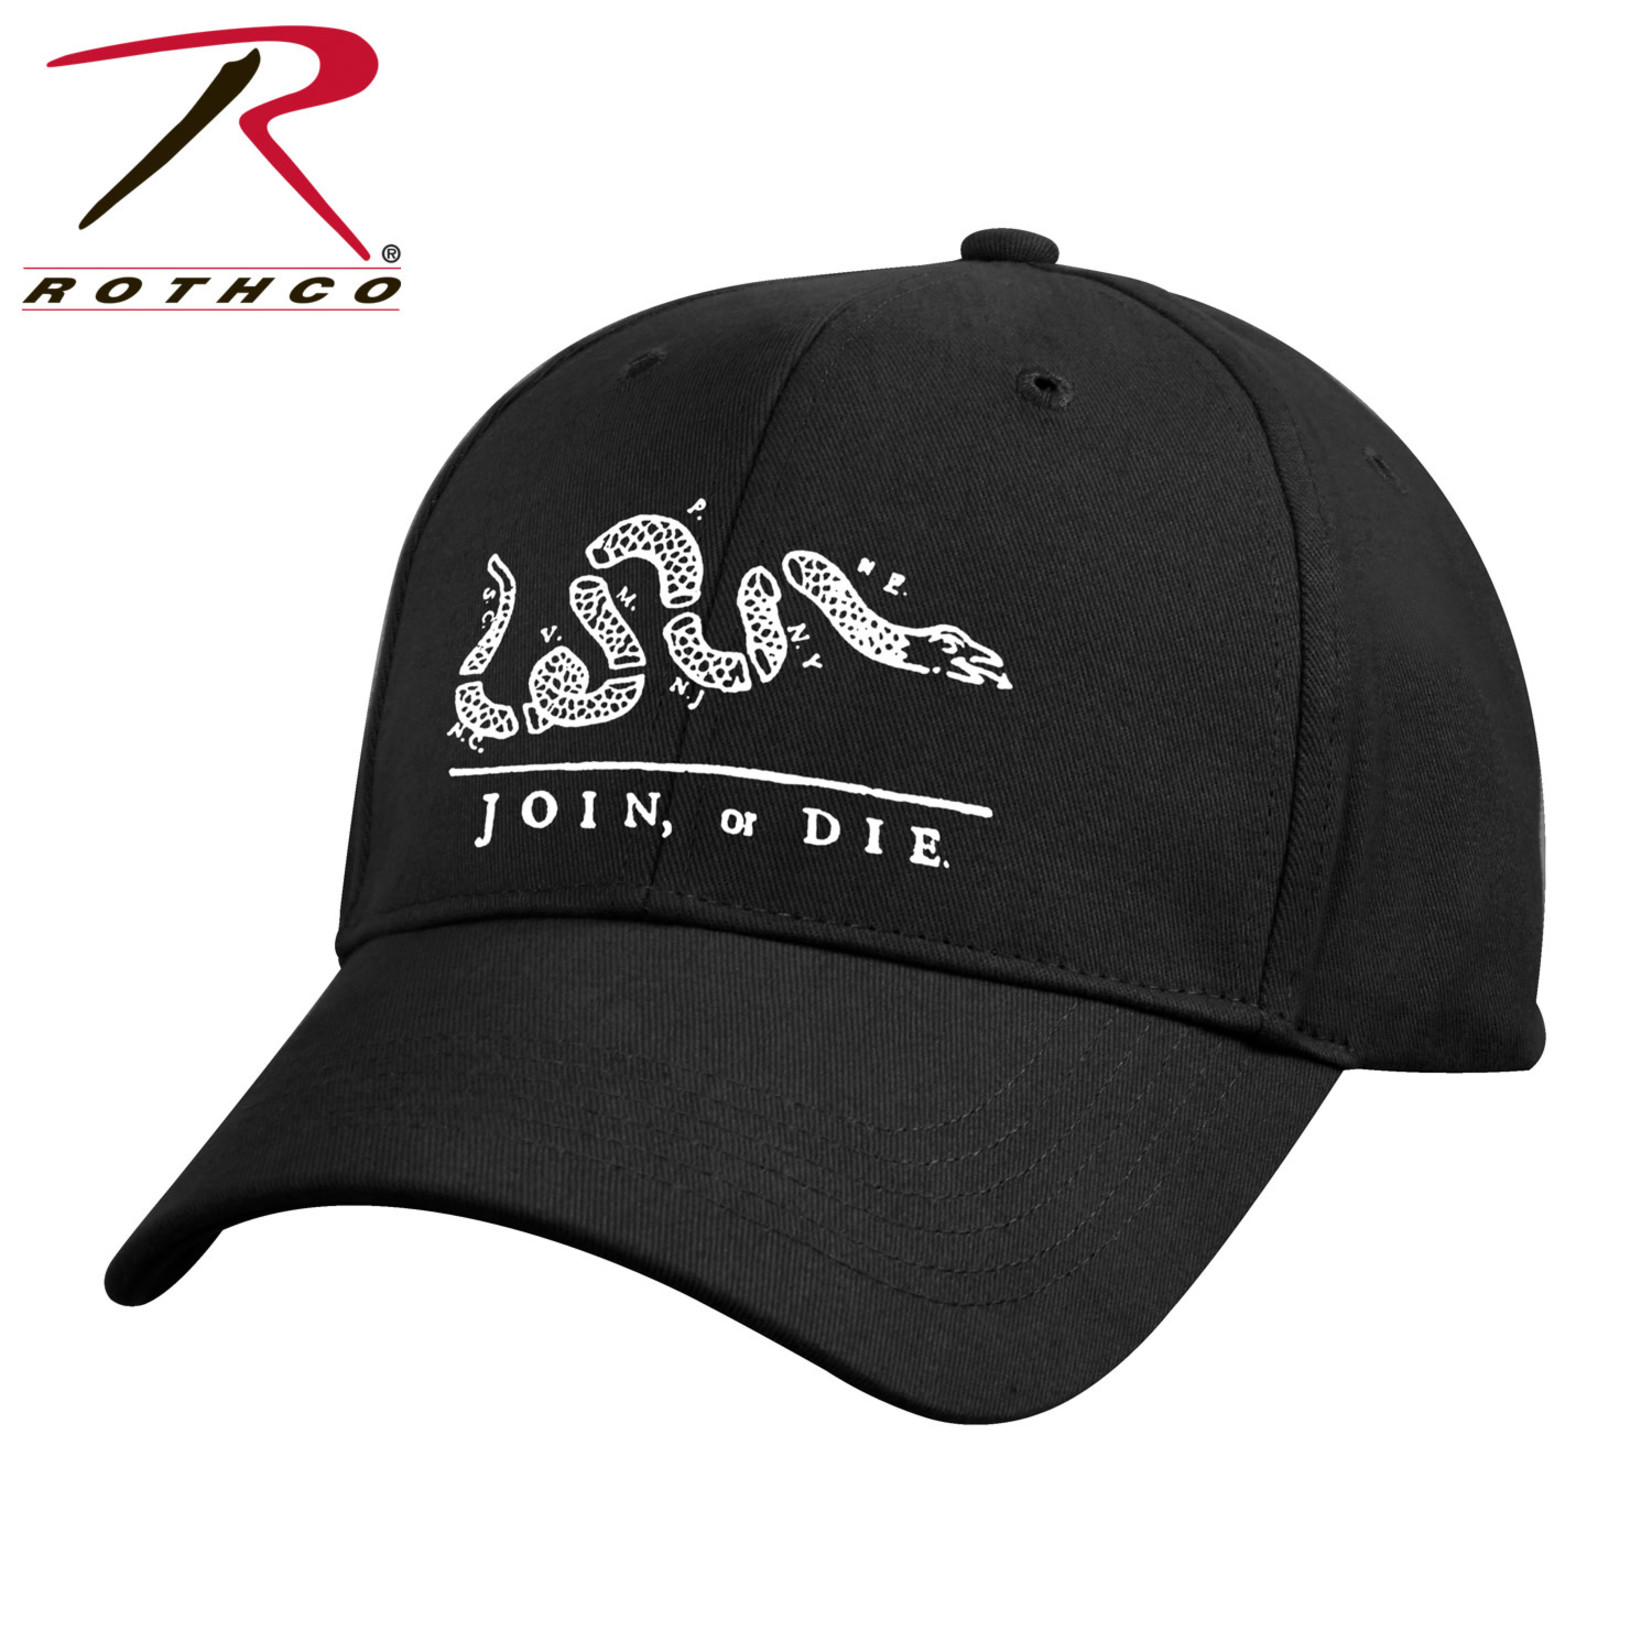 Rothco Rothco Join Or Die Deluxe Cap